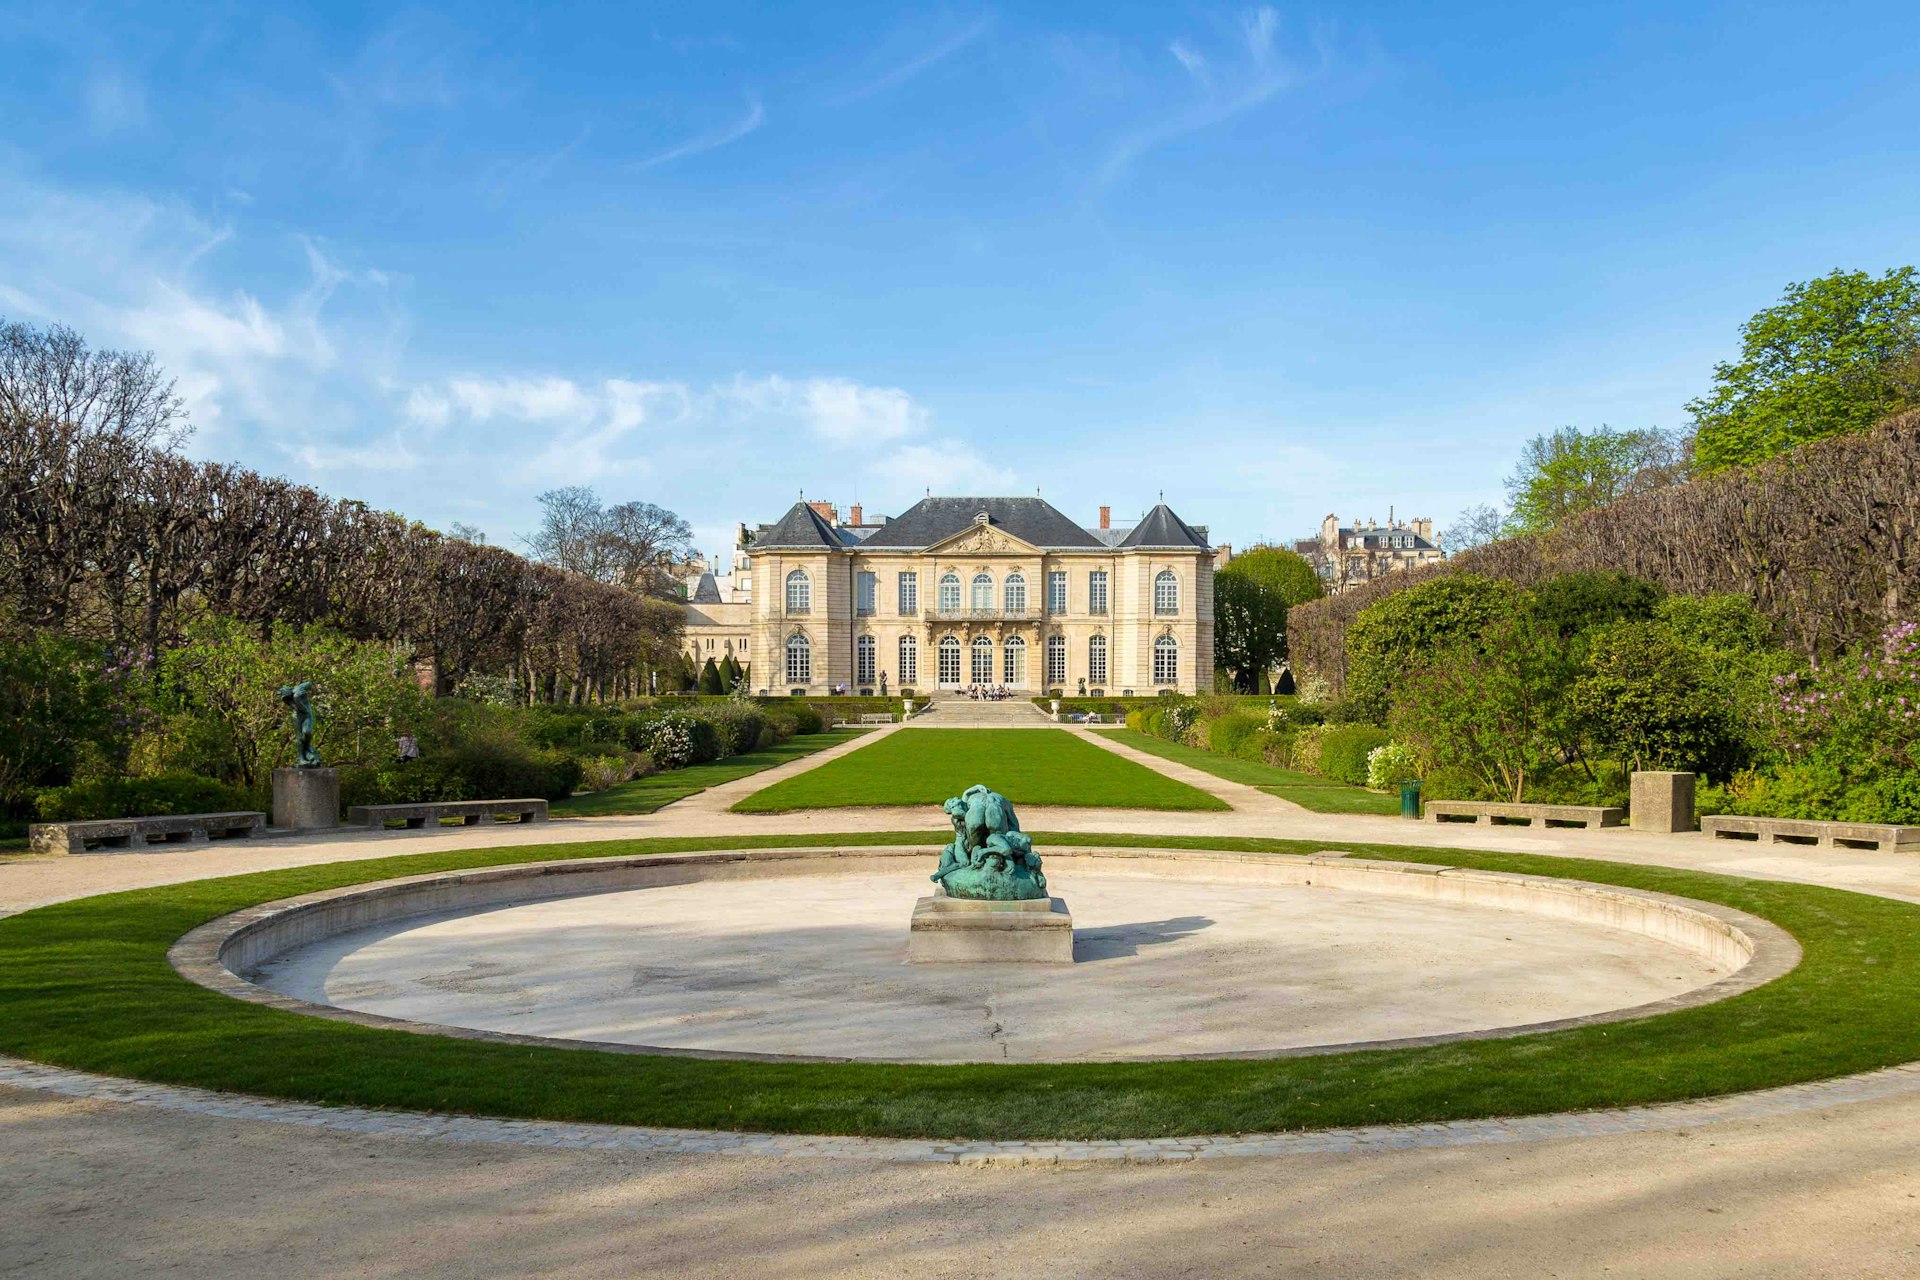 External view of Musée Rodin in Paris and its gardens.